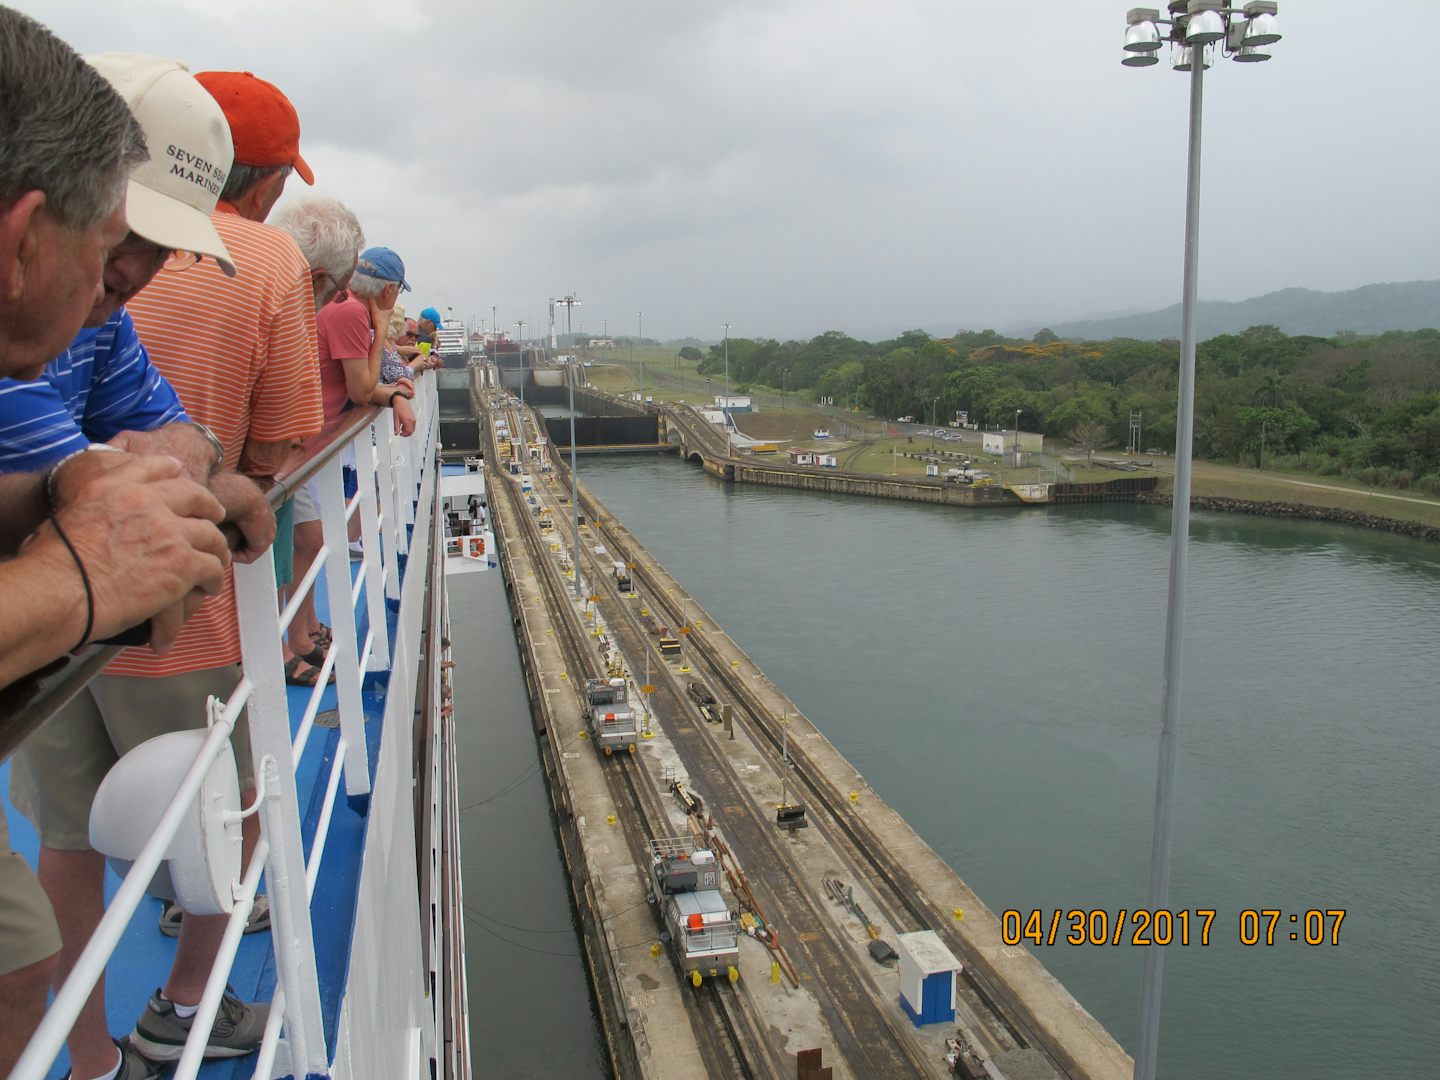 Going through one of the locks in the Panama canal.